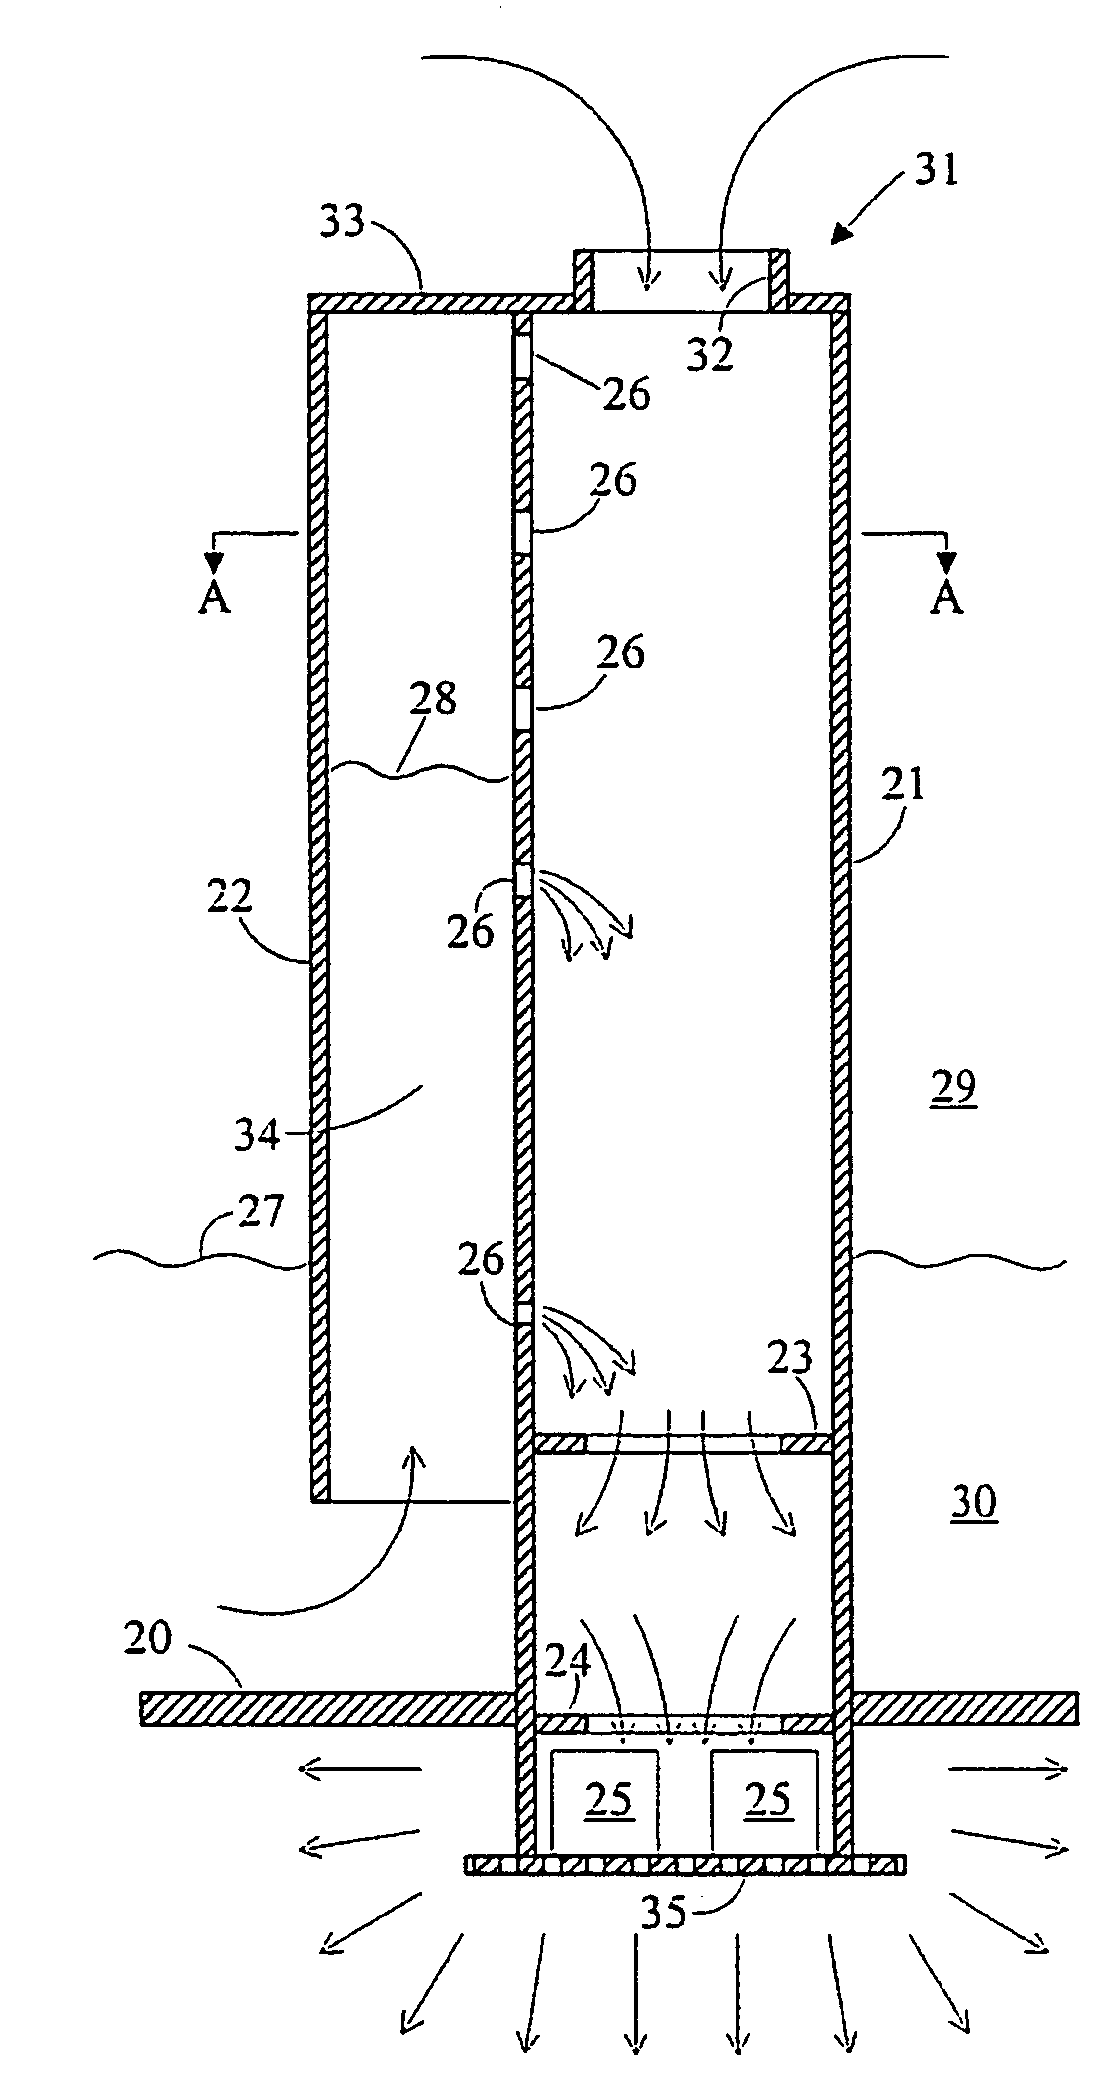 Distribution device for two-phase concurrent downflow vessels